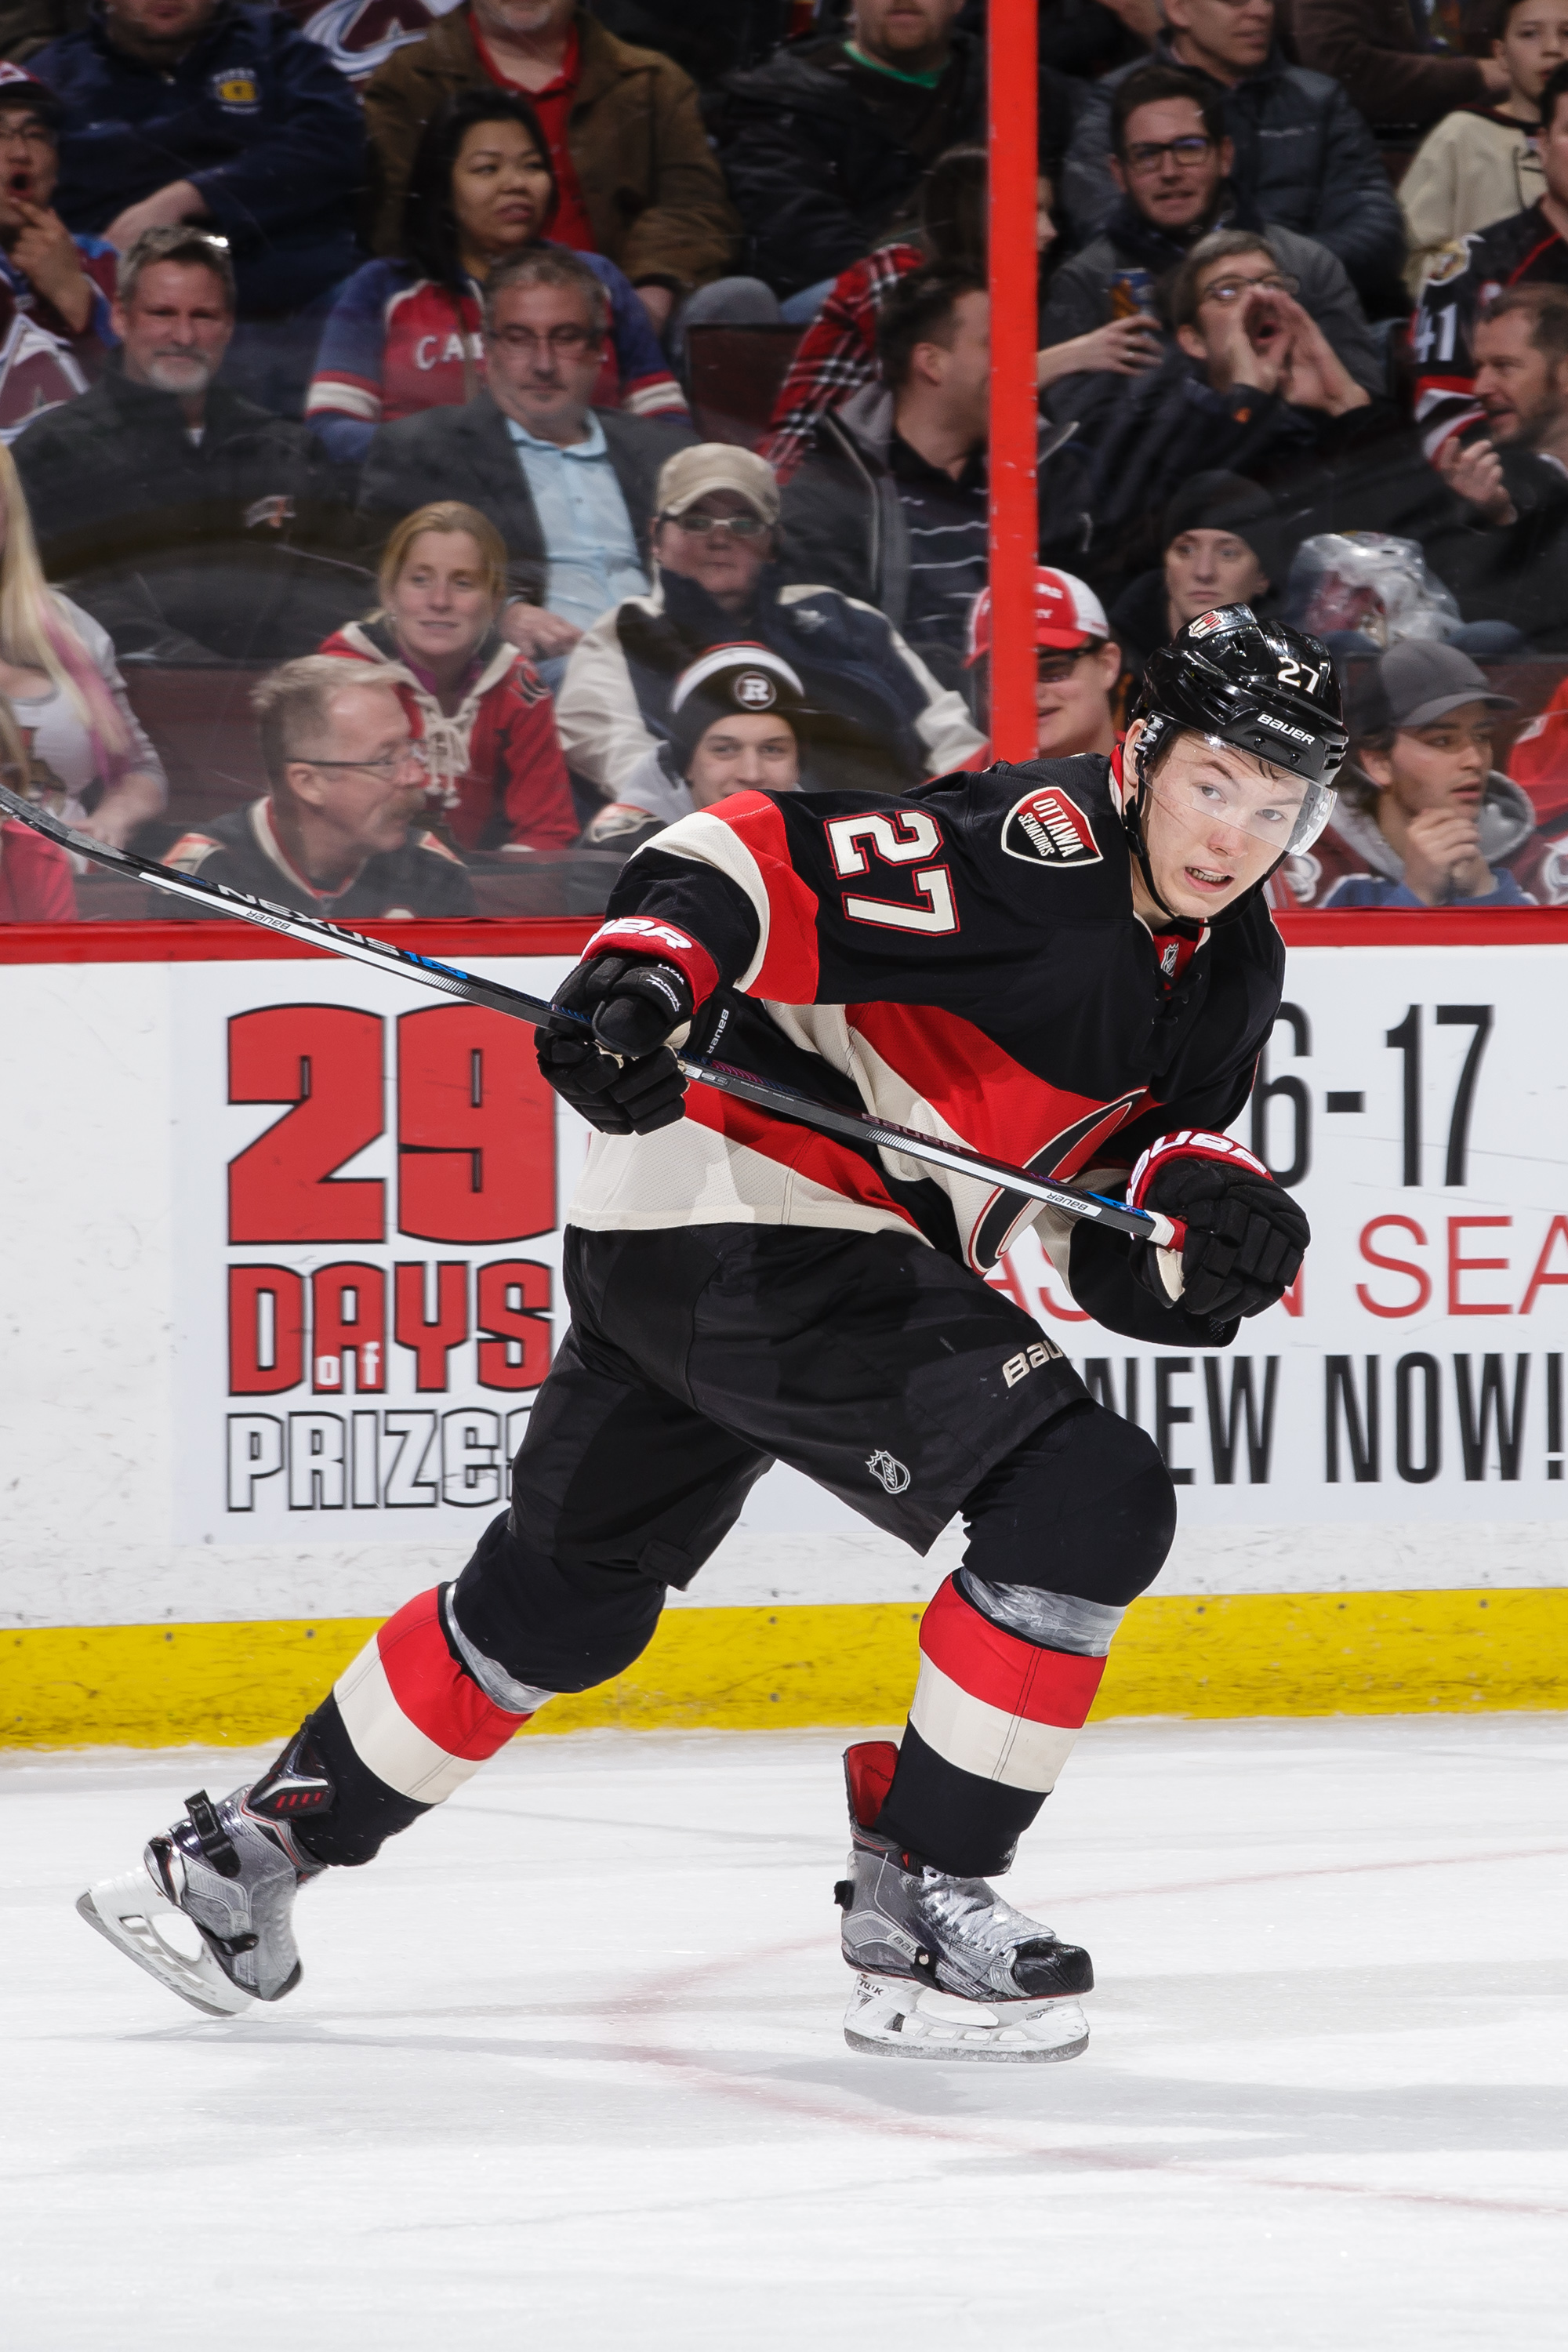 Senators' Asking Price for Lazar is Comically High